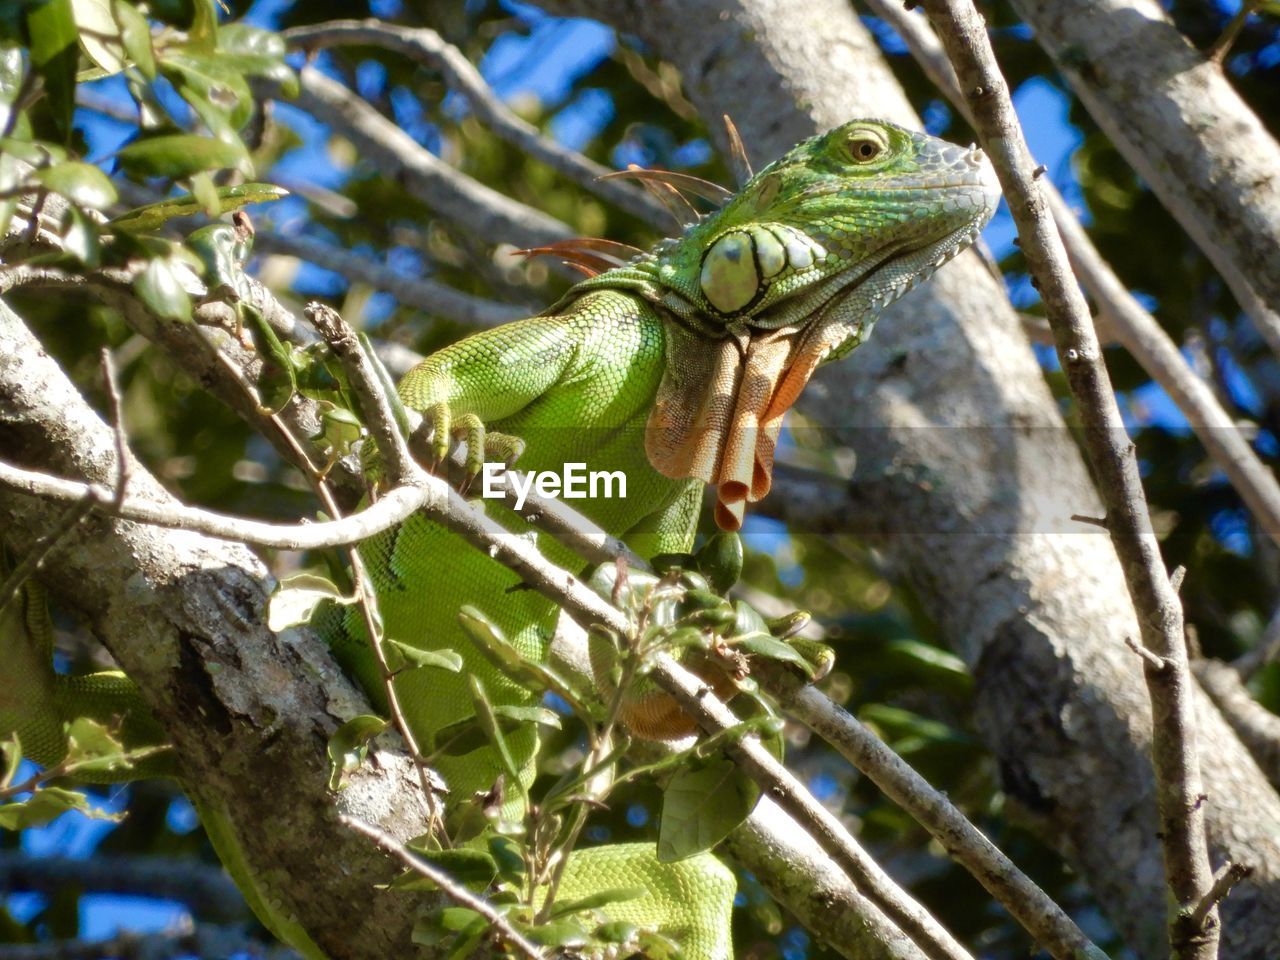 CLOSE-UP OF A LIZARD ON BRANCH